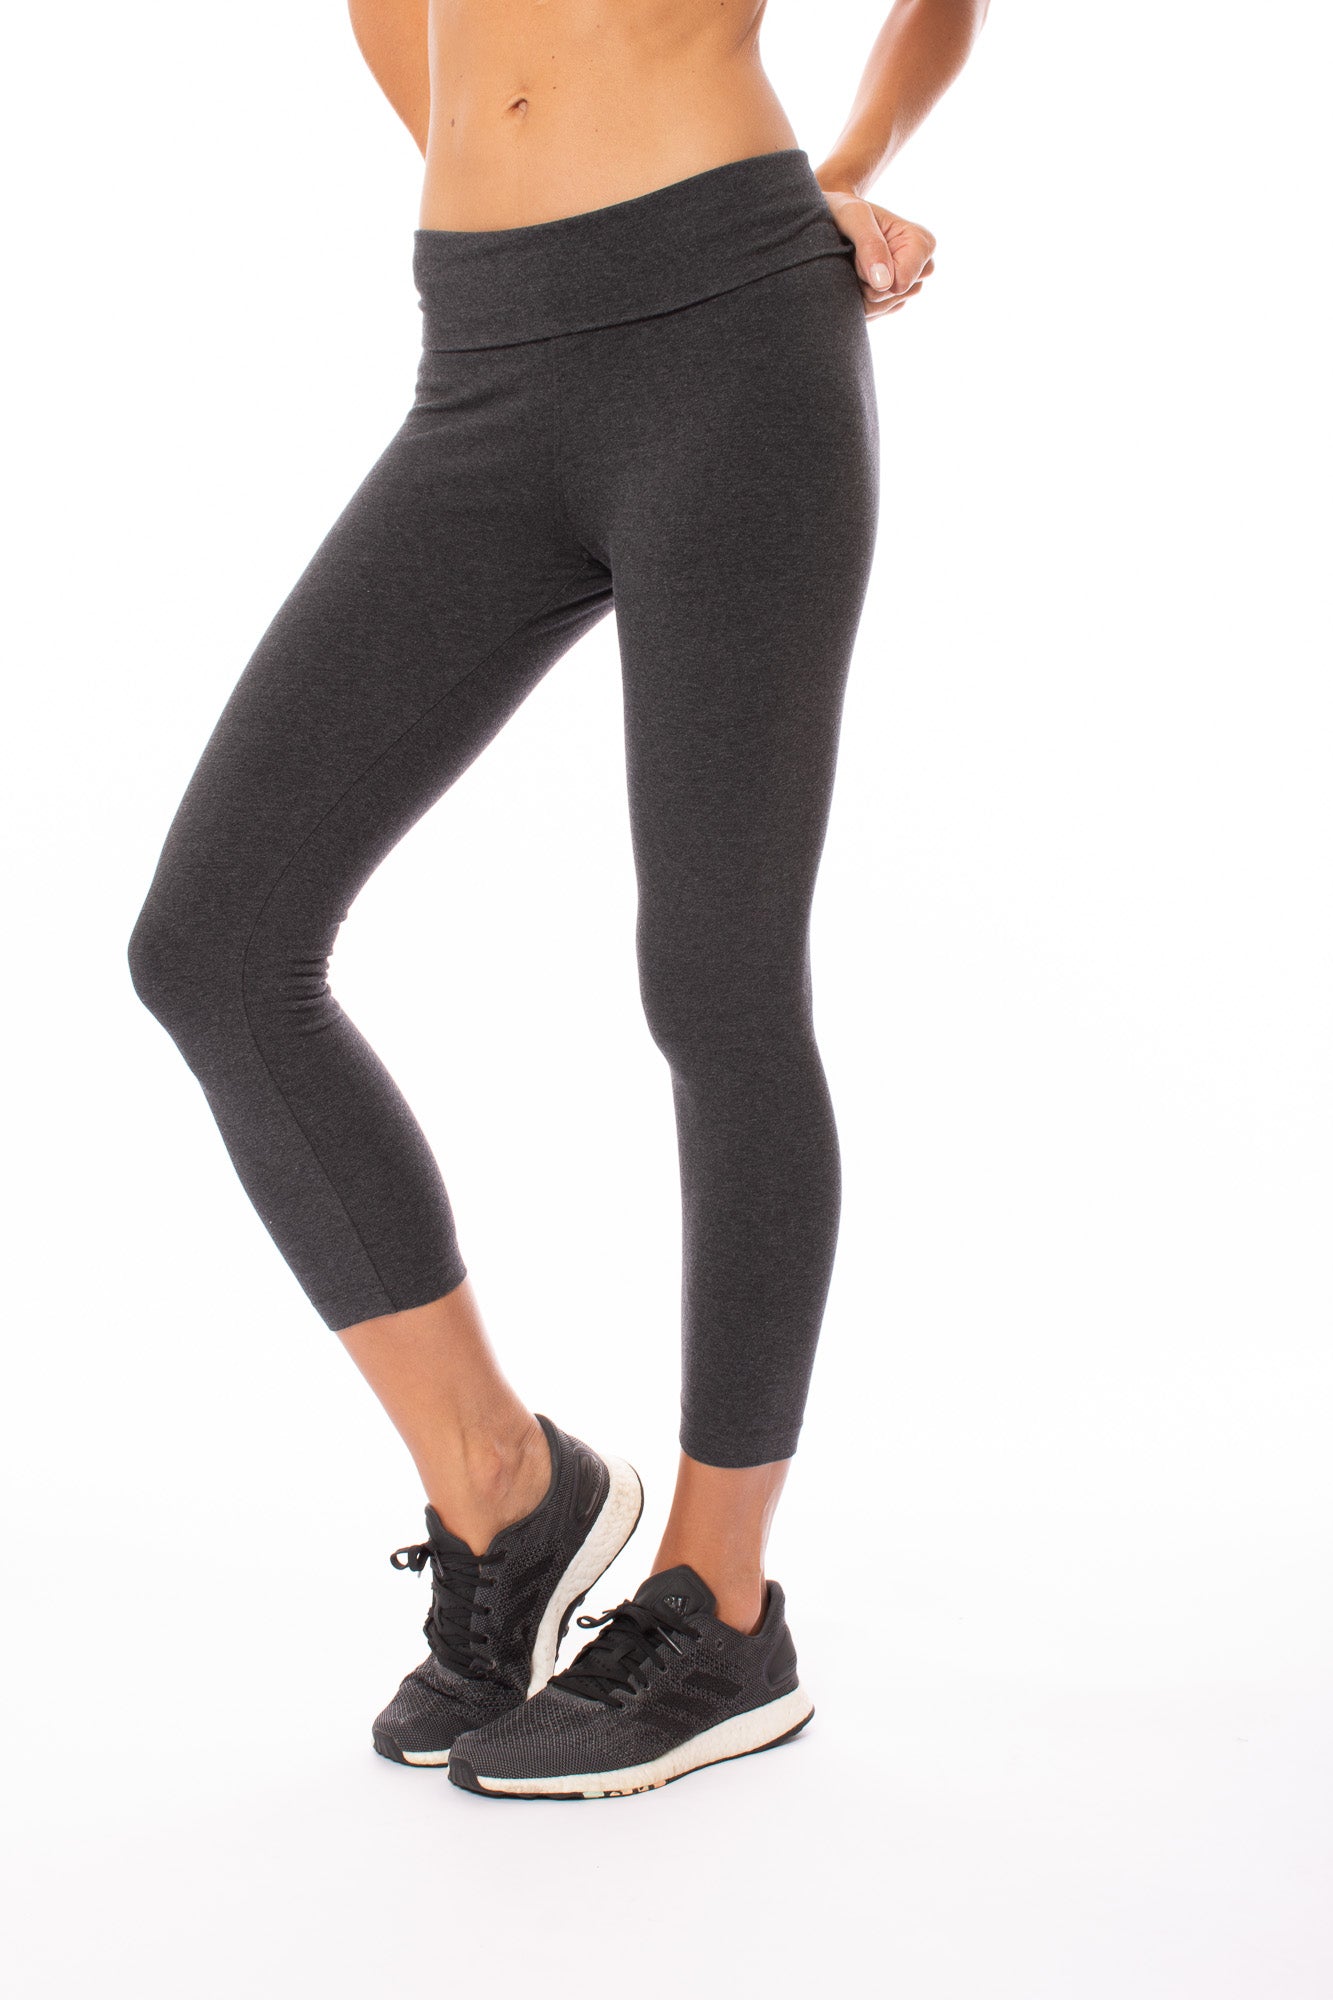 Roll Down Layered Legging (Style 588, Dark Charcoal) by Hard Tail